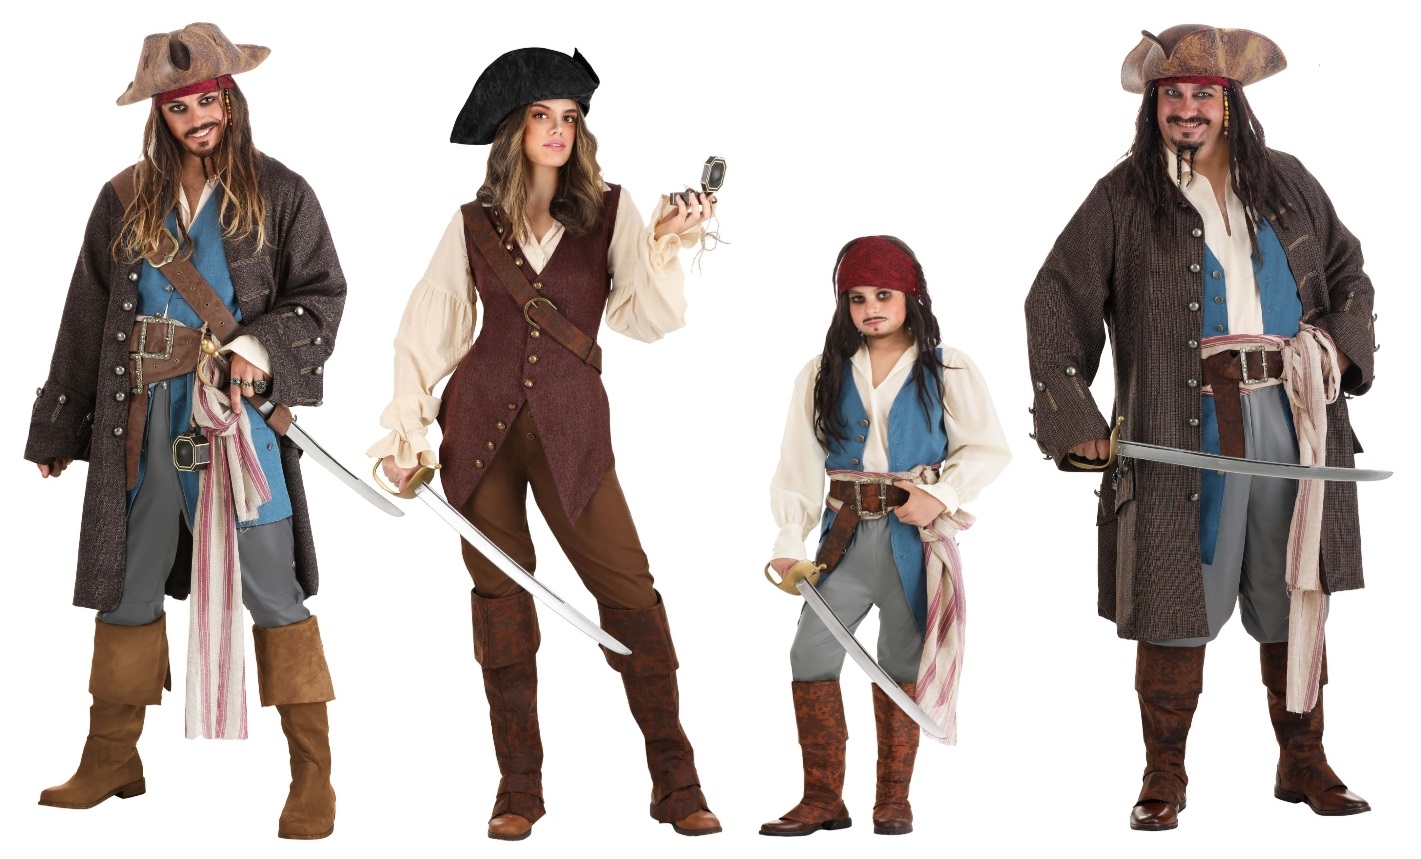 Pirates of the Caribbean Costumes